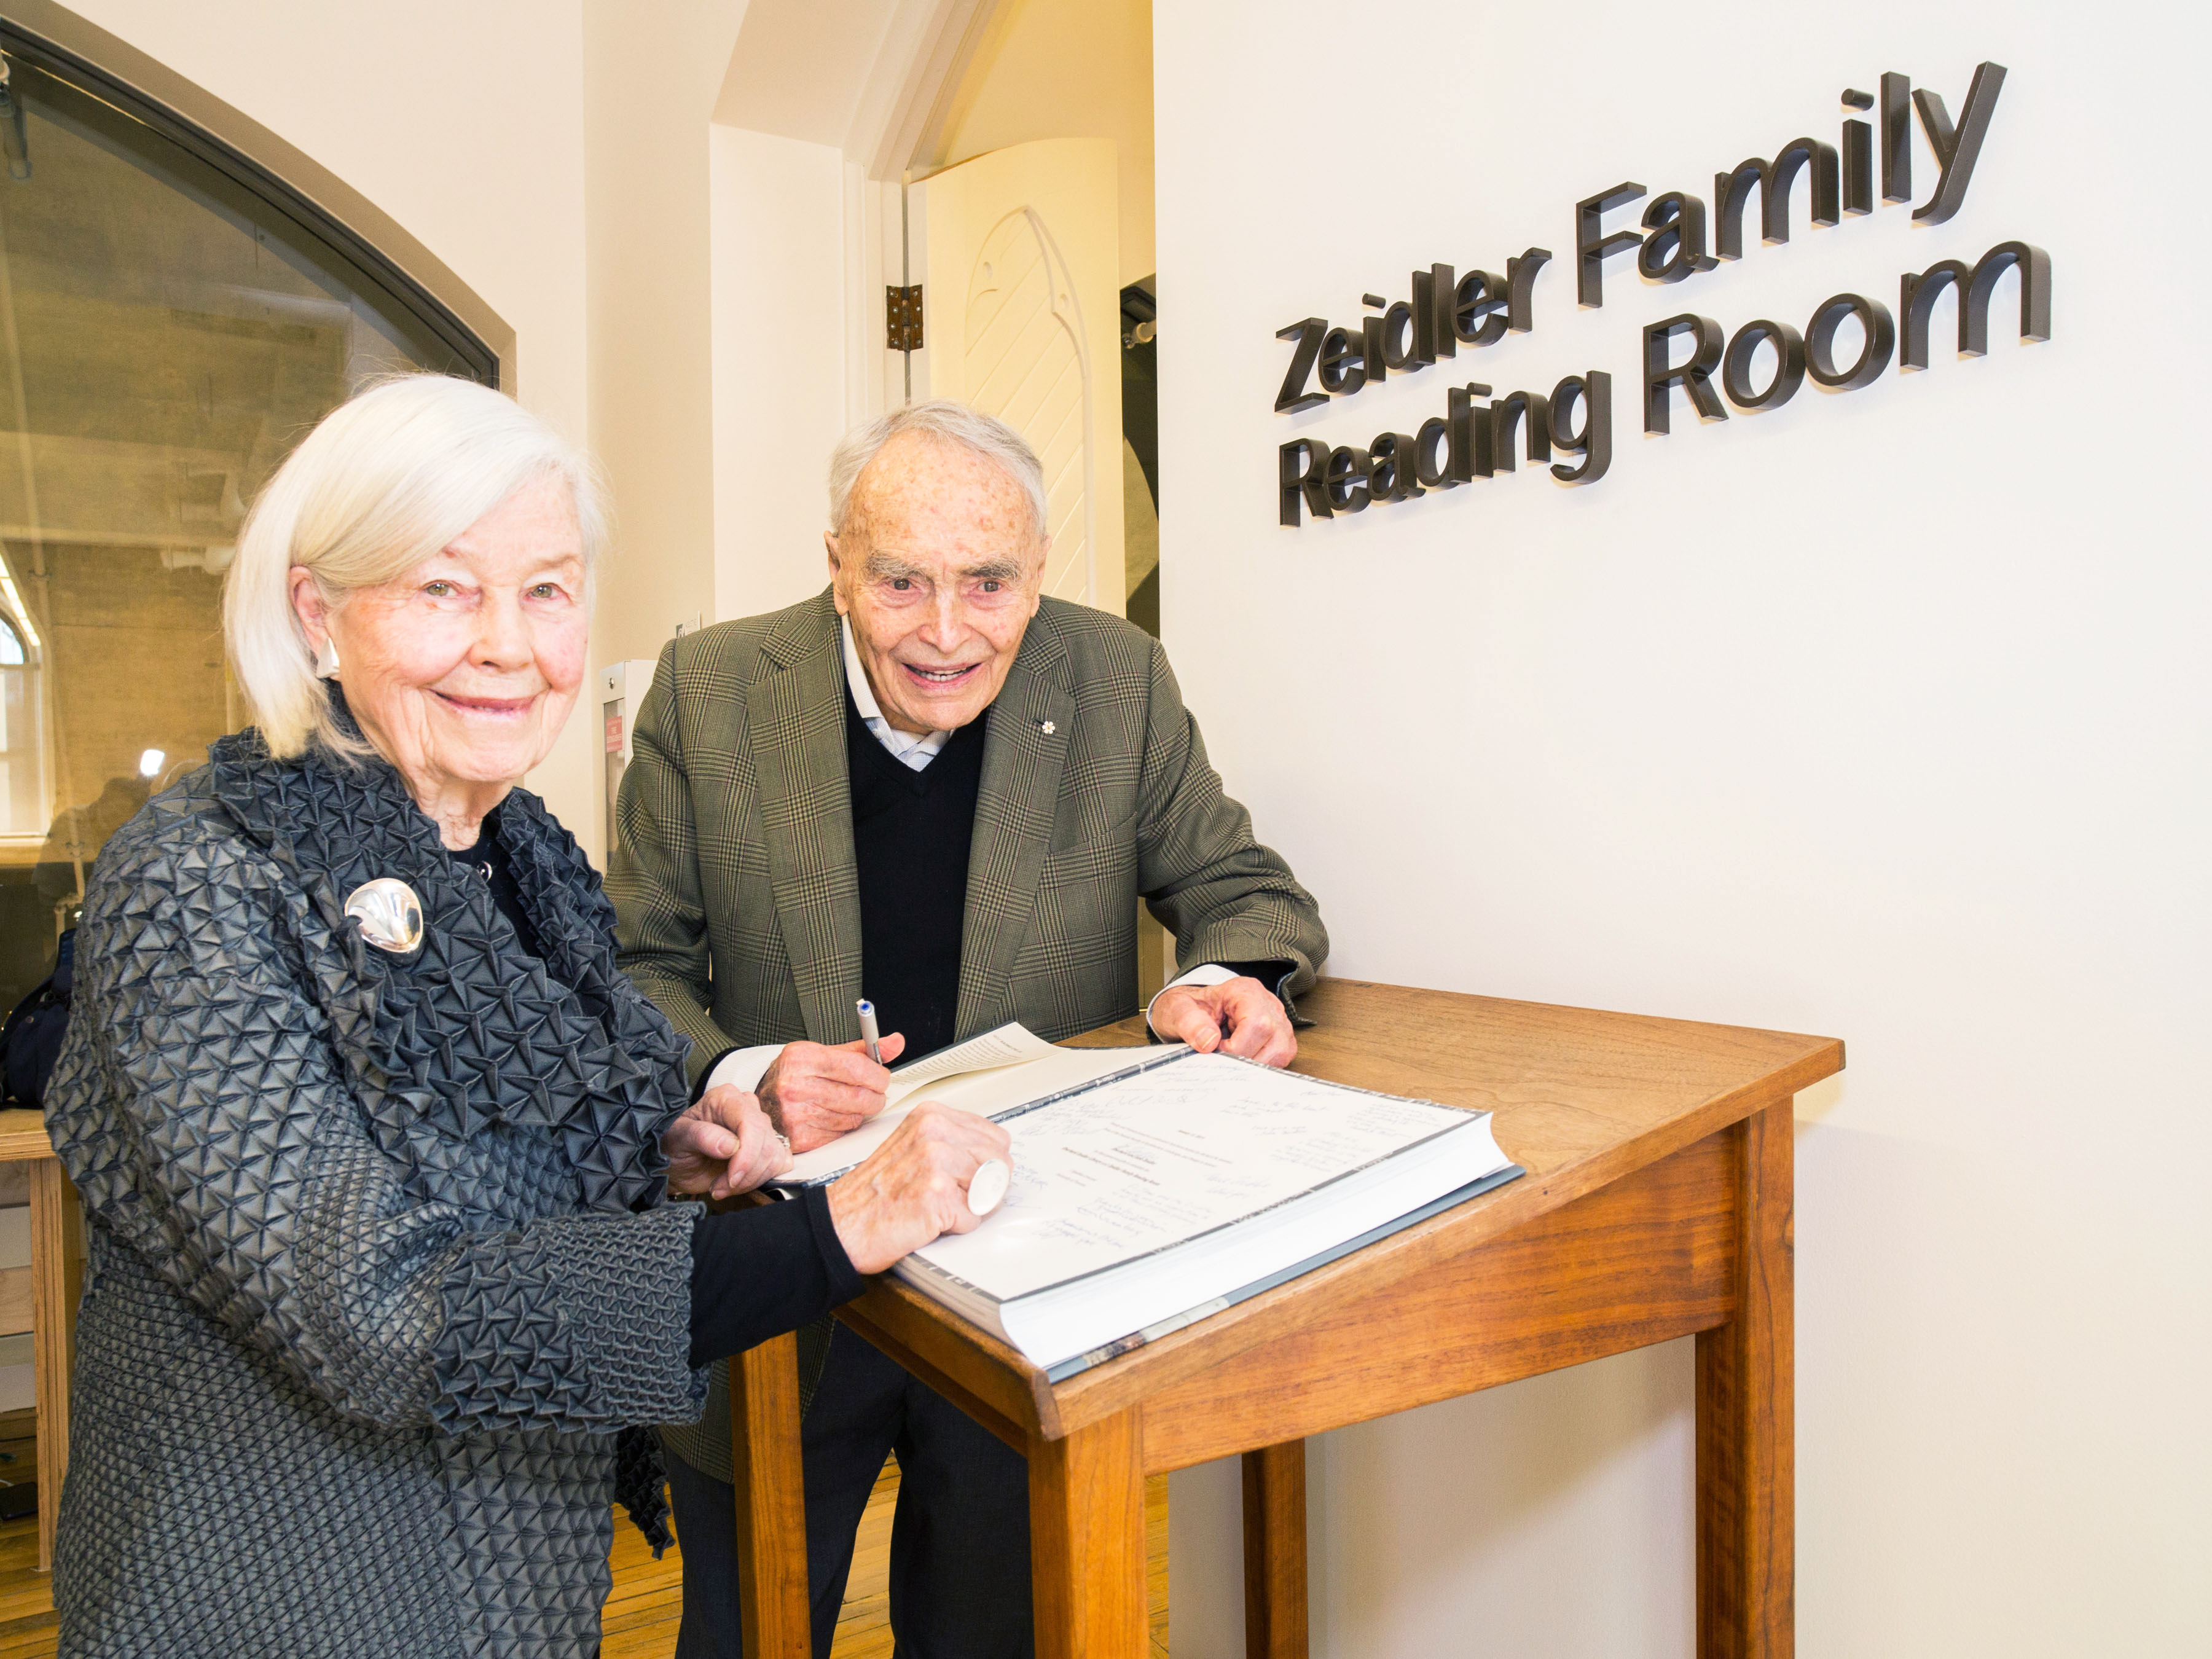 Dr. Eberhard Zeidler and Mrs. Jane Zeidler sign the guestbook at the Zeidler Family Reading Room of the Eberhard Zeidler Library in 2019